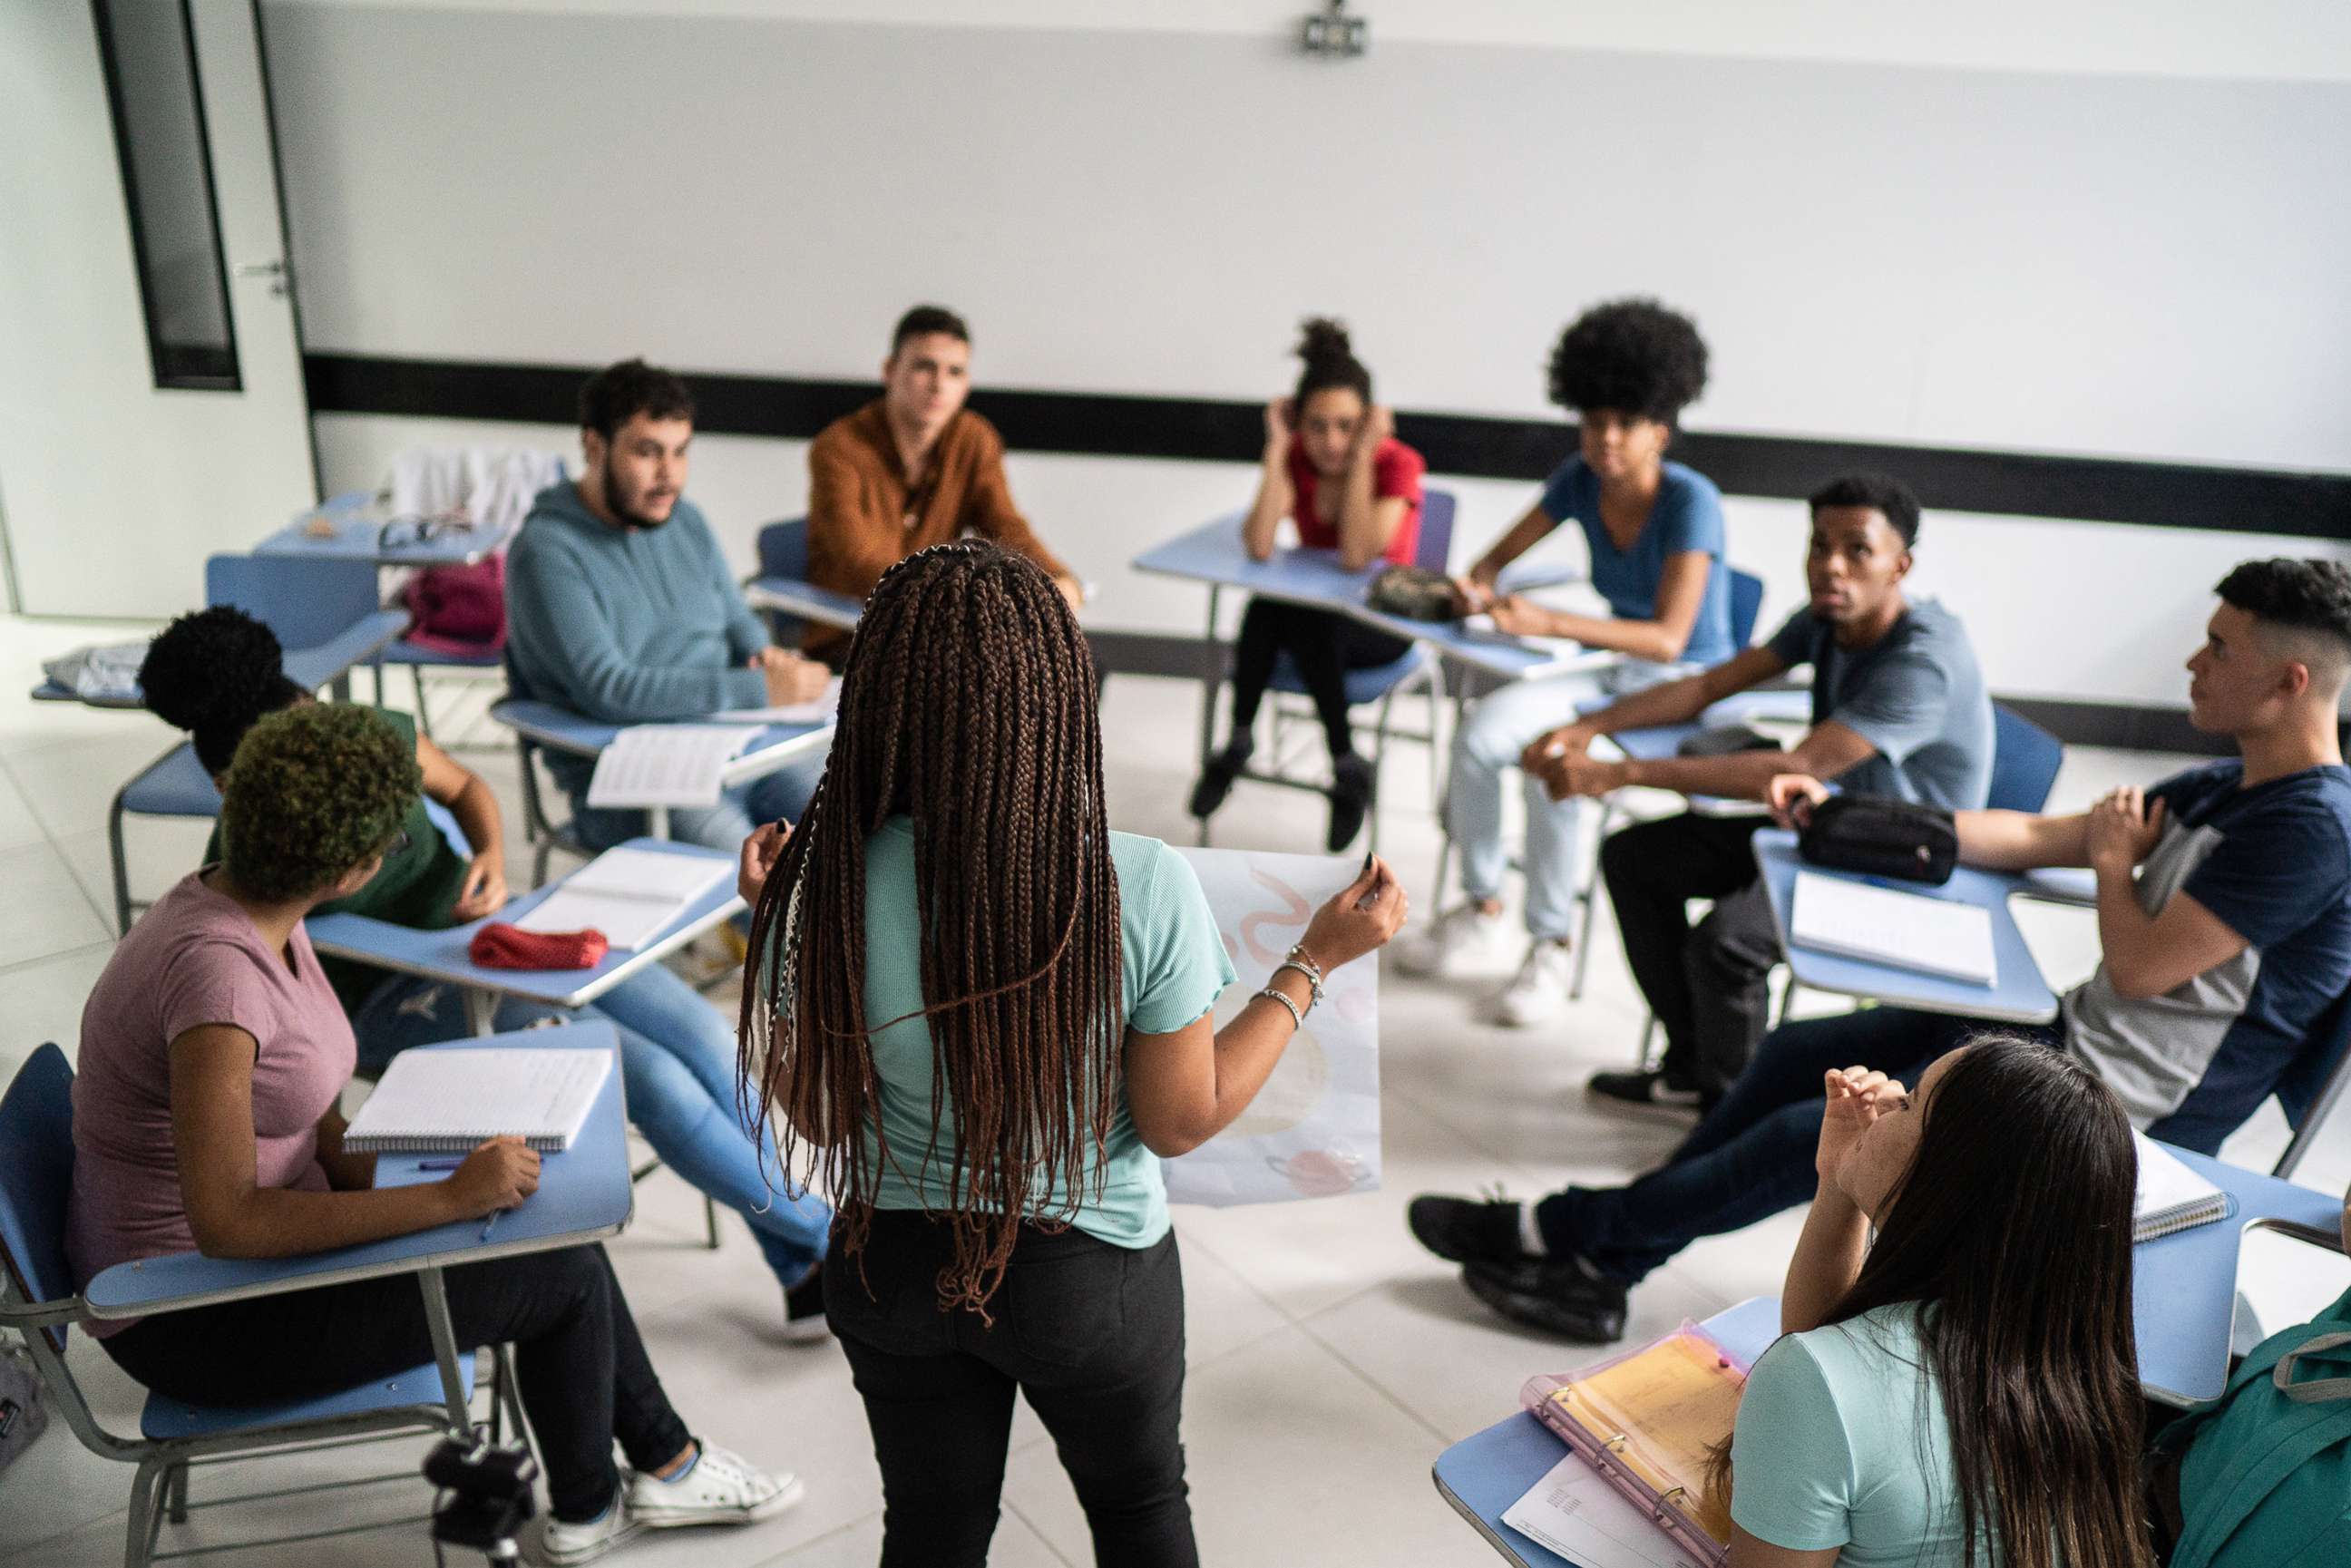 PHOTO: A teenager student speaks to fellow classmates in the classroom in a stock photo.